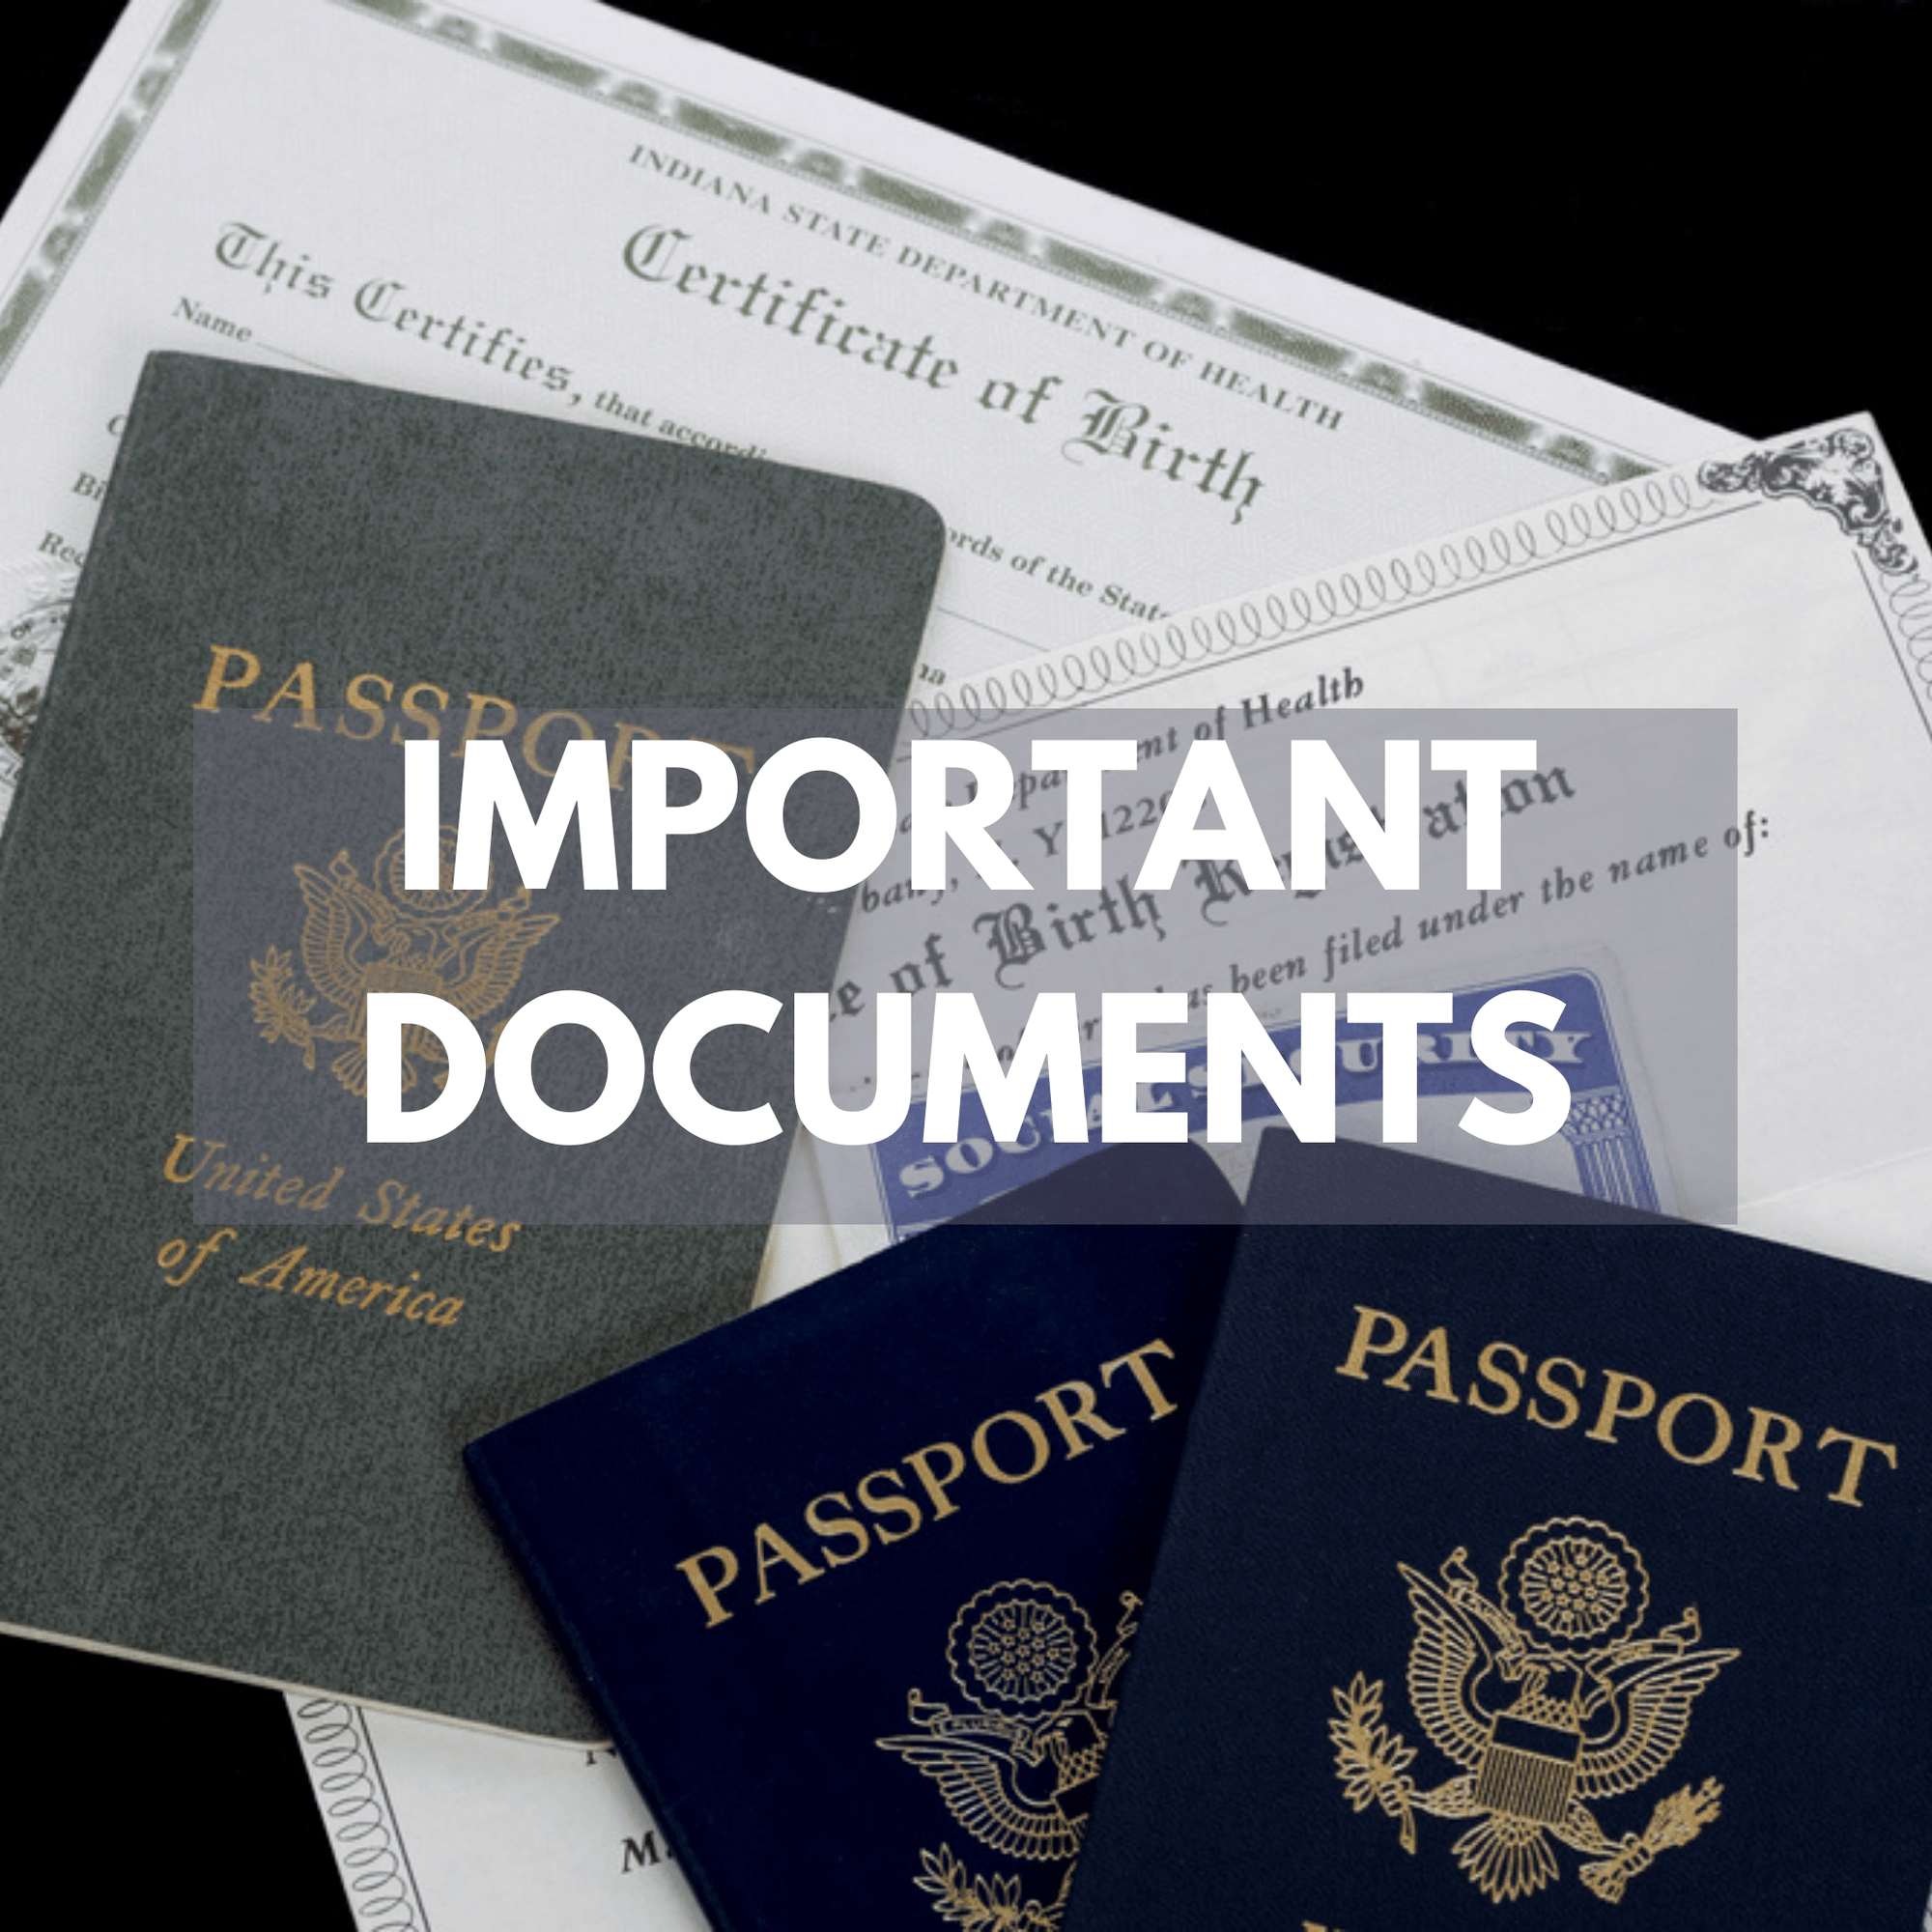 pictures of passports and other important documents